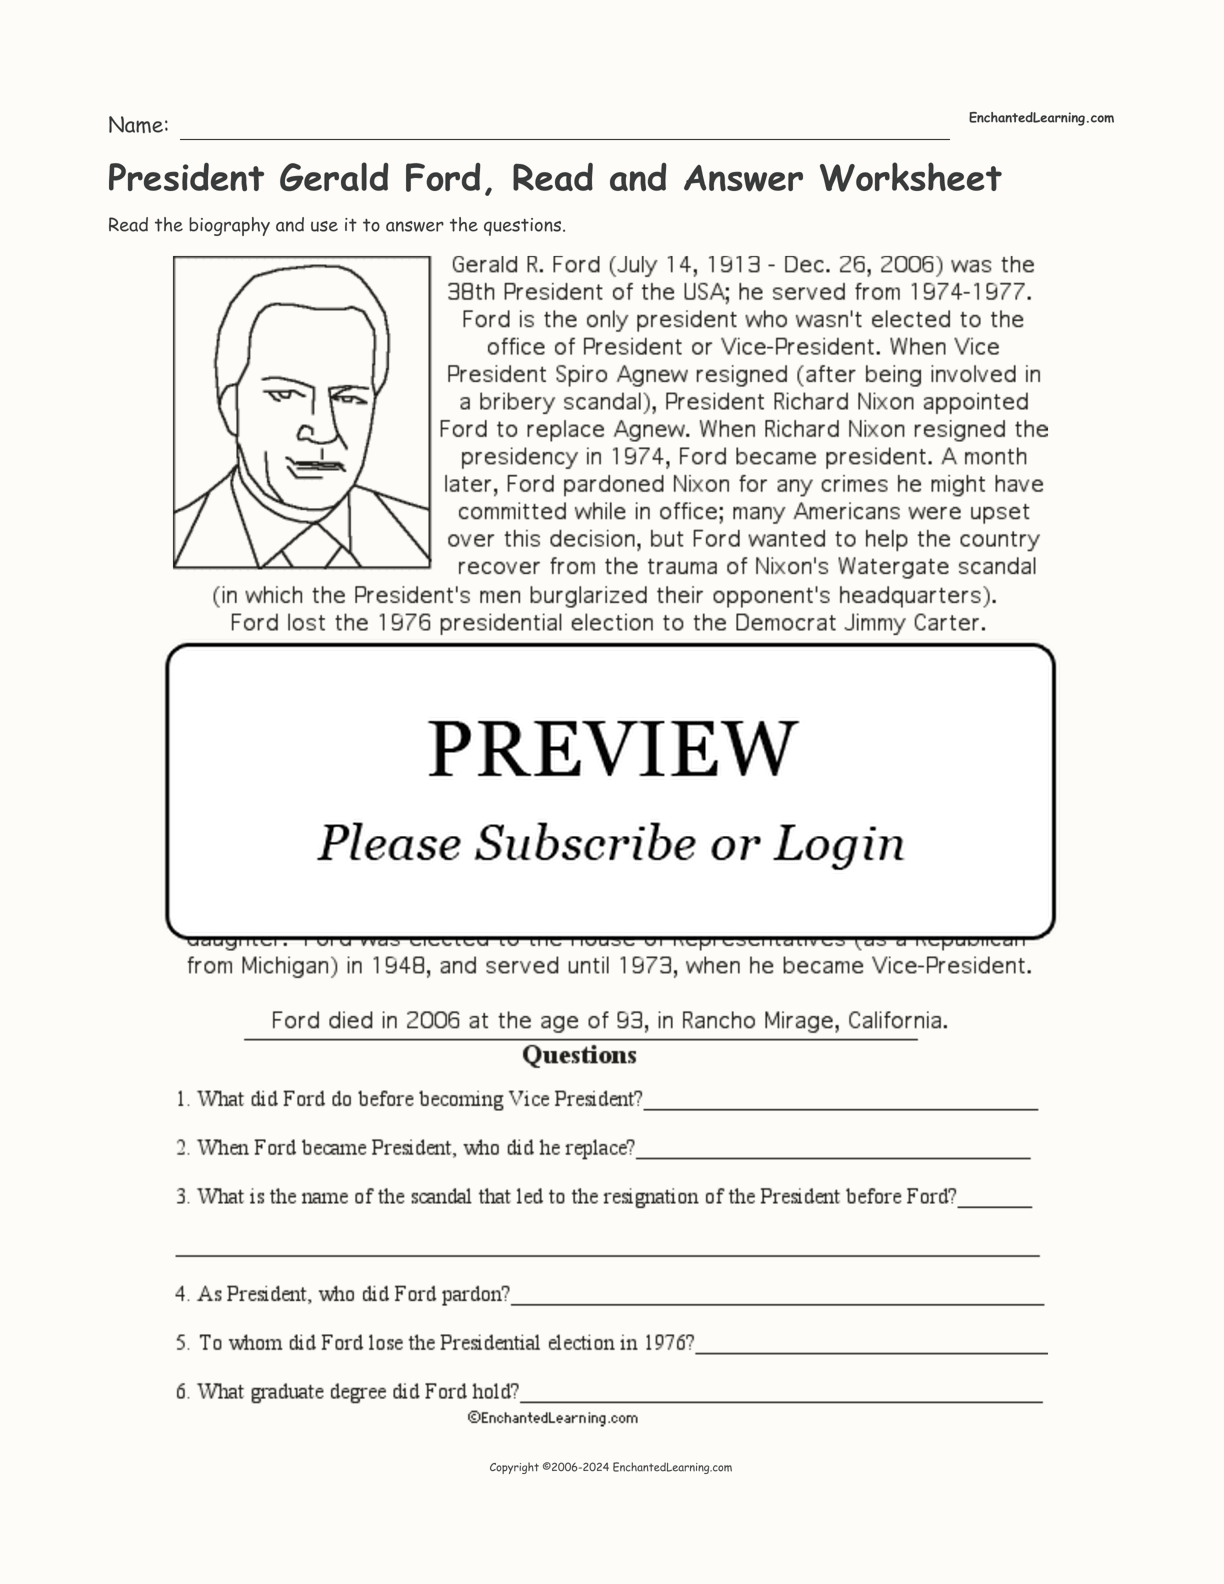 President Gerald Ford, Read and Answer Worksheet interactive worksheet page 1